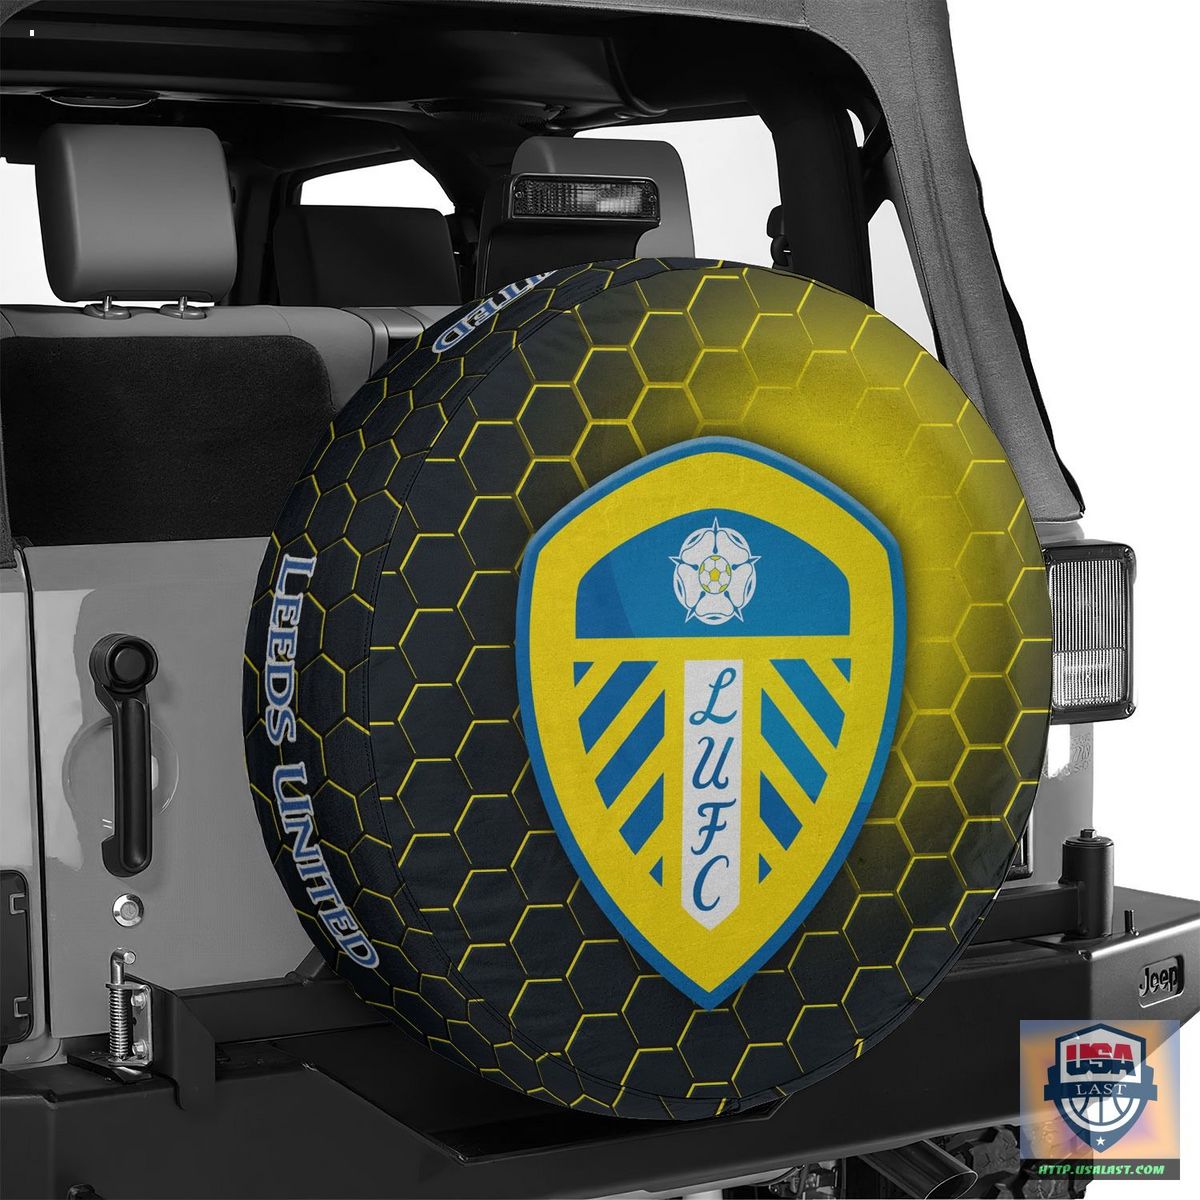 AMAZING Leeds United FC Spare Tire Cover